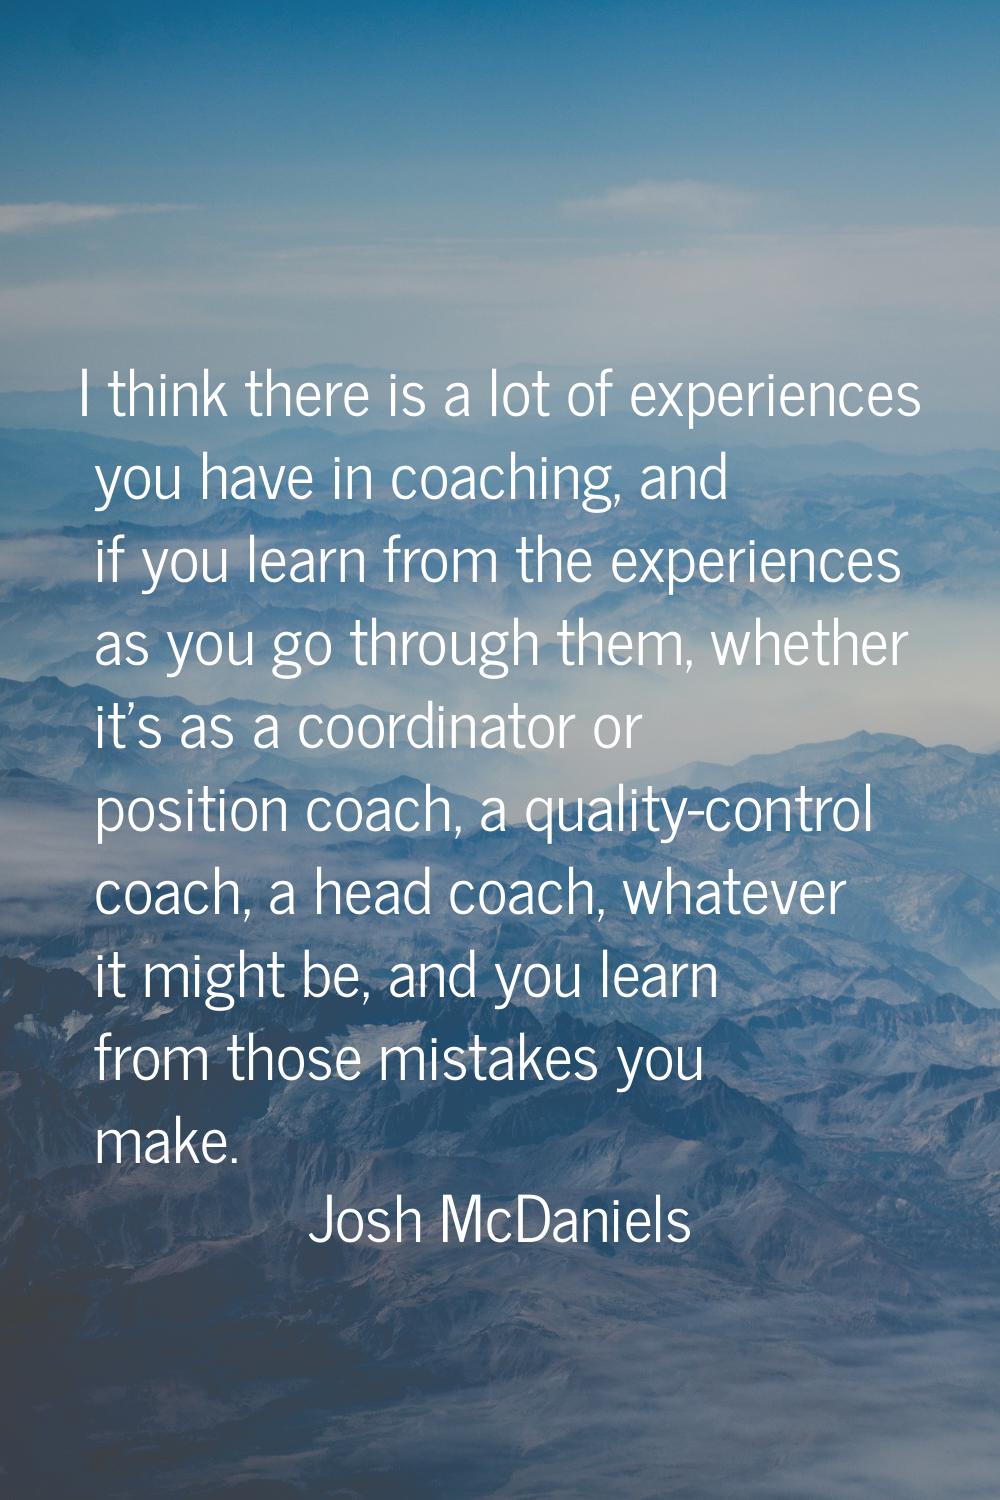 I think there is a lot of experiences you have in coaching, and if you learn from the experiences a